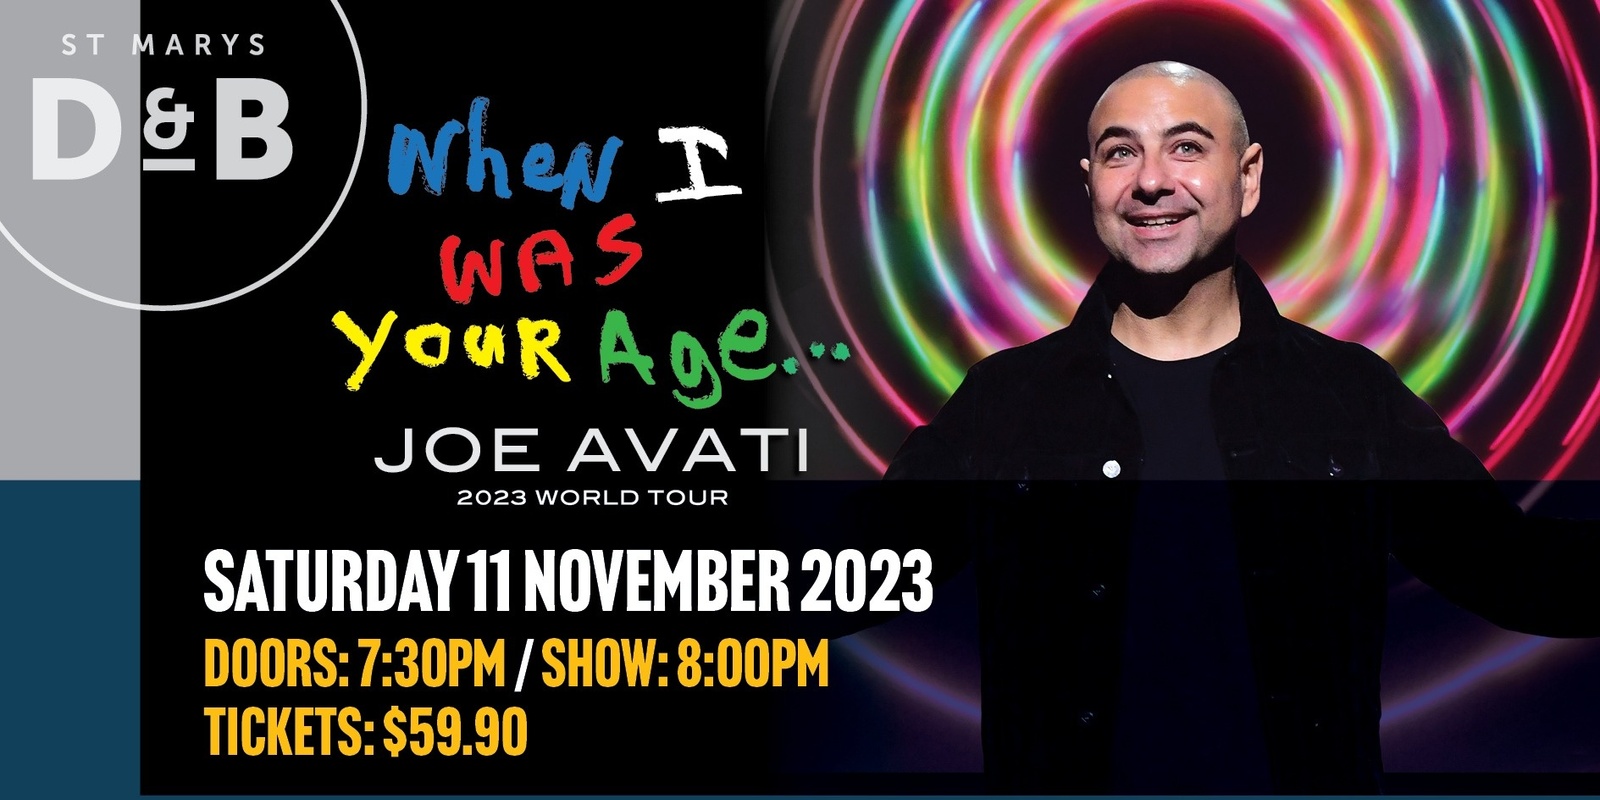 Banner image for  Joe Avati 2023 World Tour - When I was your age...